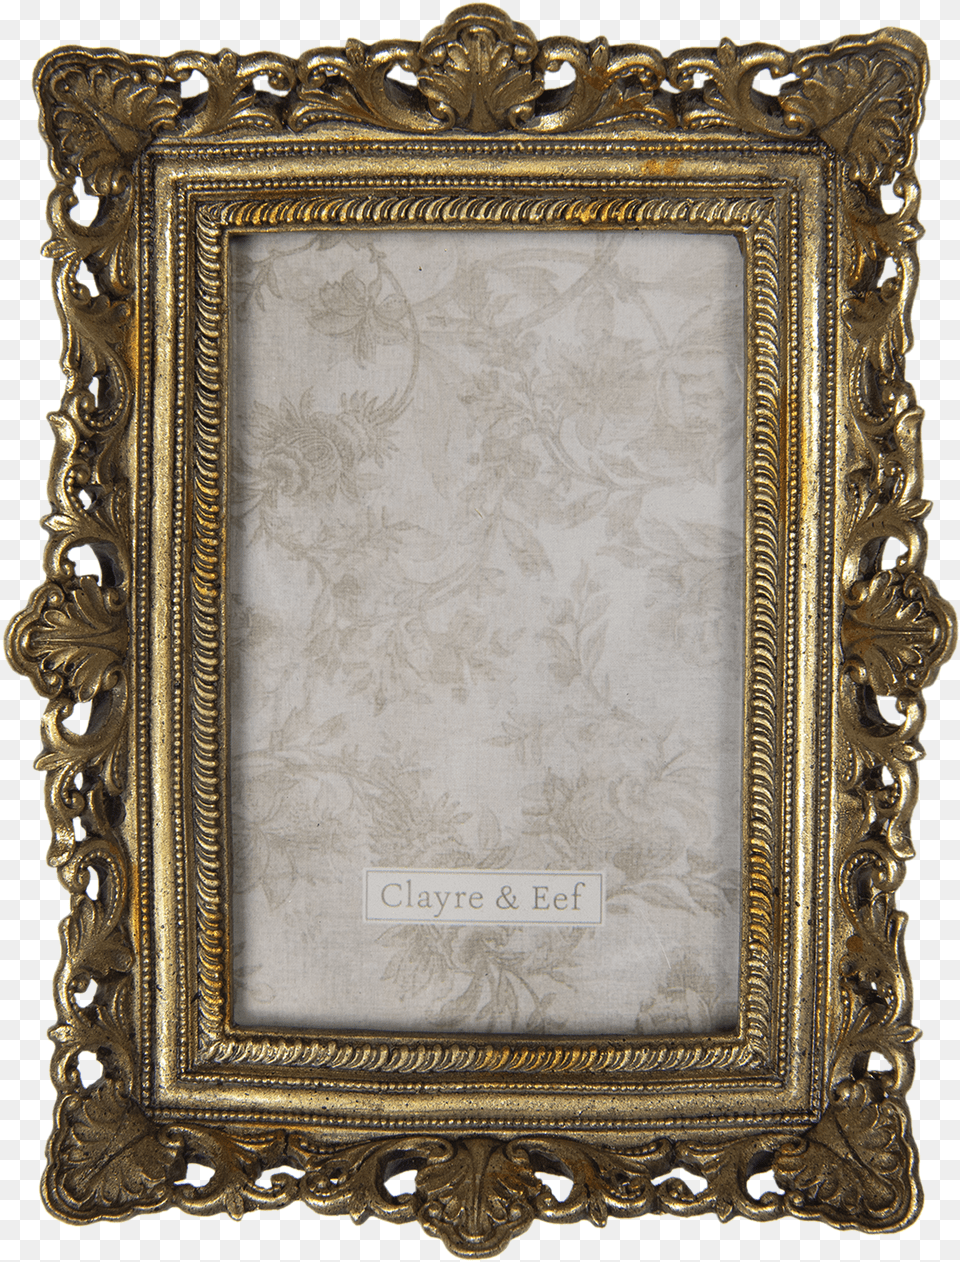 Details About Vintage Baroque Style Antique Gold Ornate Photo Picture Frame 4x6 Freestanding Picture Frame, Apple, Food, Fruit, Plant Png